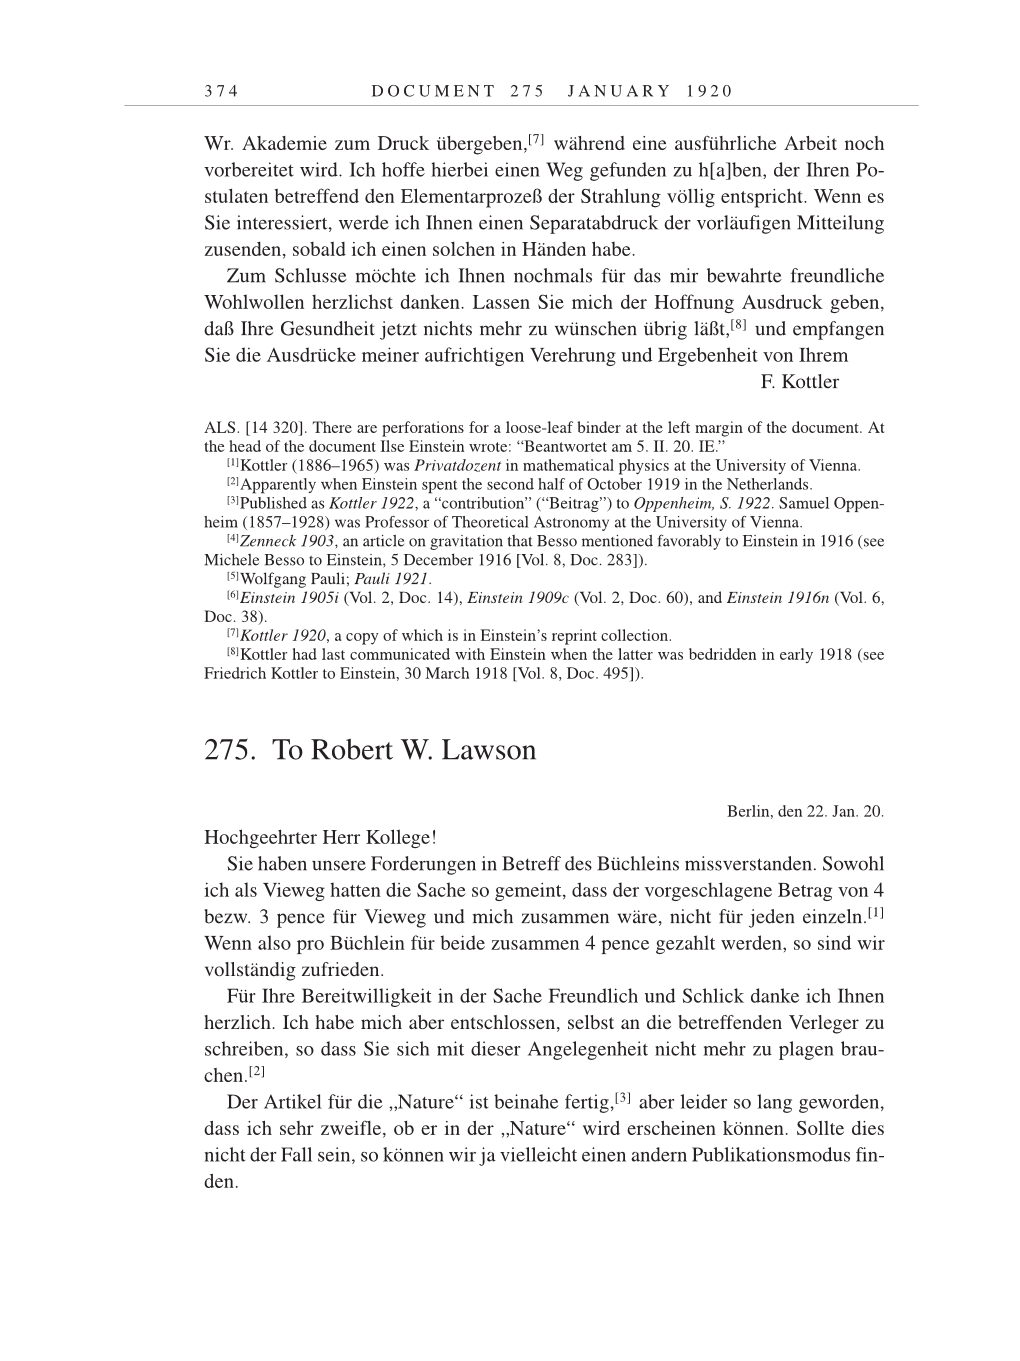 Volume 9: The Berlin Years: Correspondence January 1919-April 1920 page 374